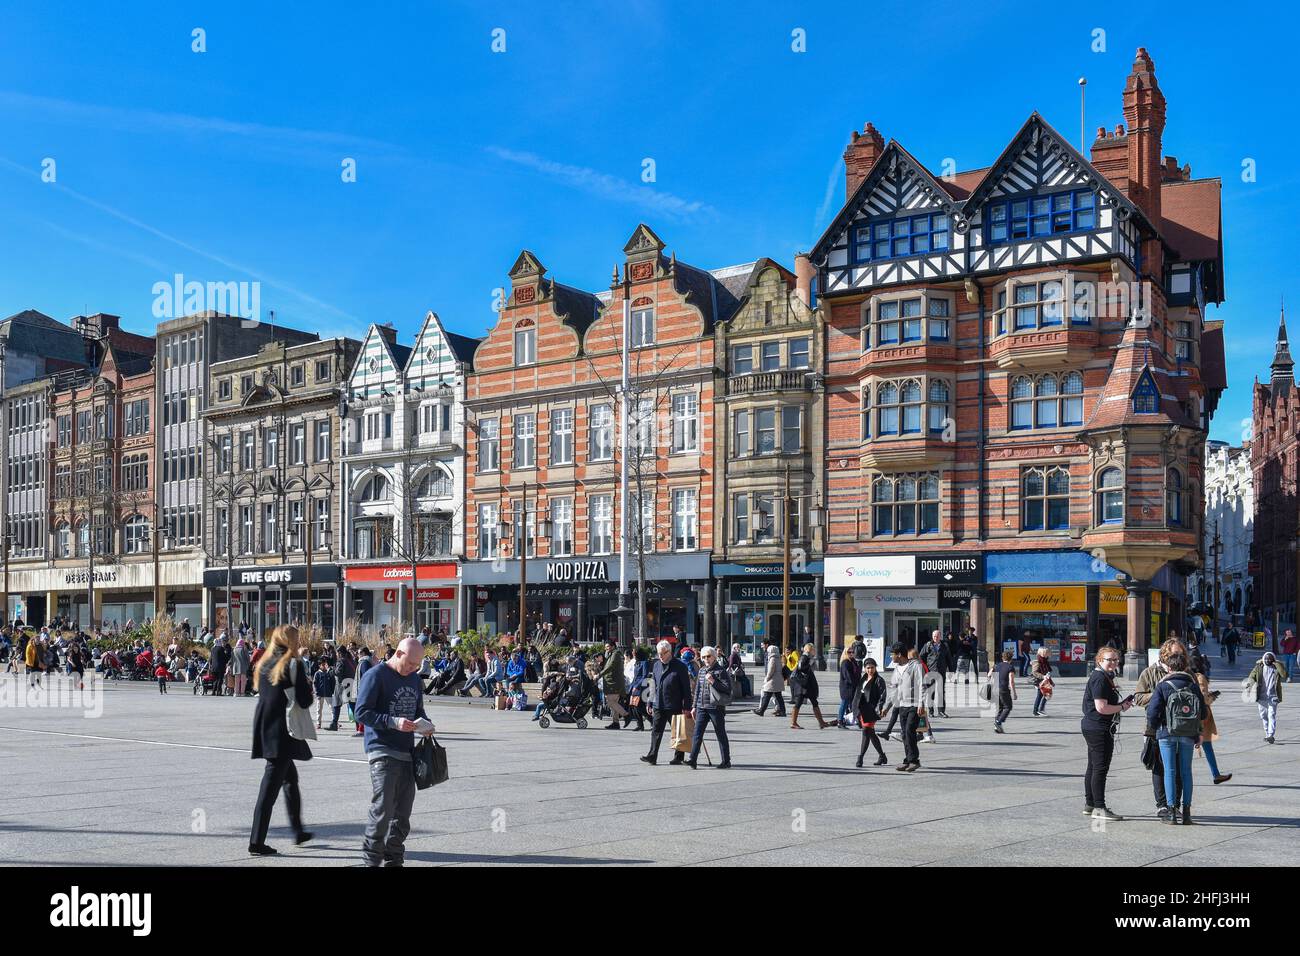 View of Traditional architecture and historical of the Shops in the old Market Square in the heart of Nottingham city centre East Midlands, England. Stock Photo